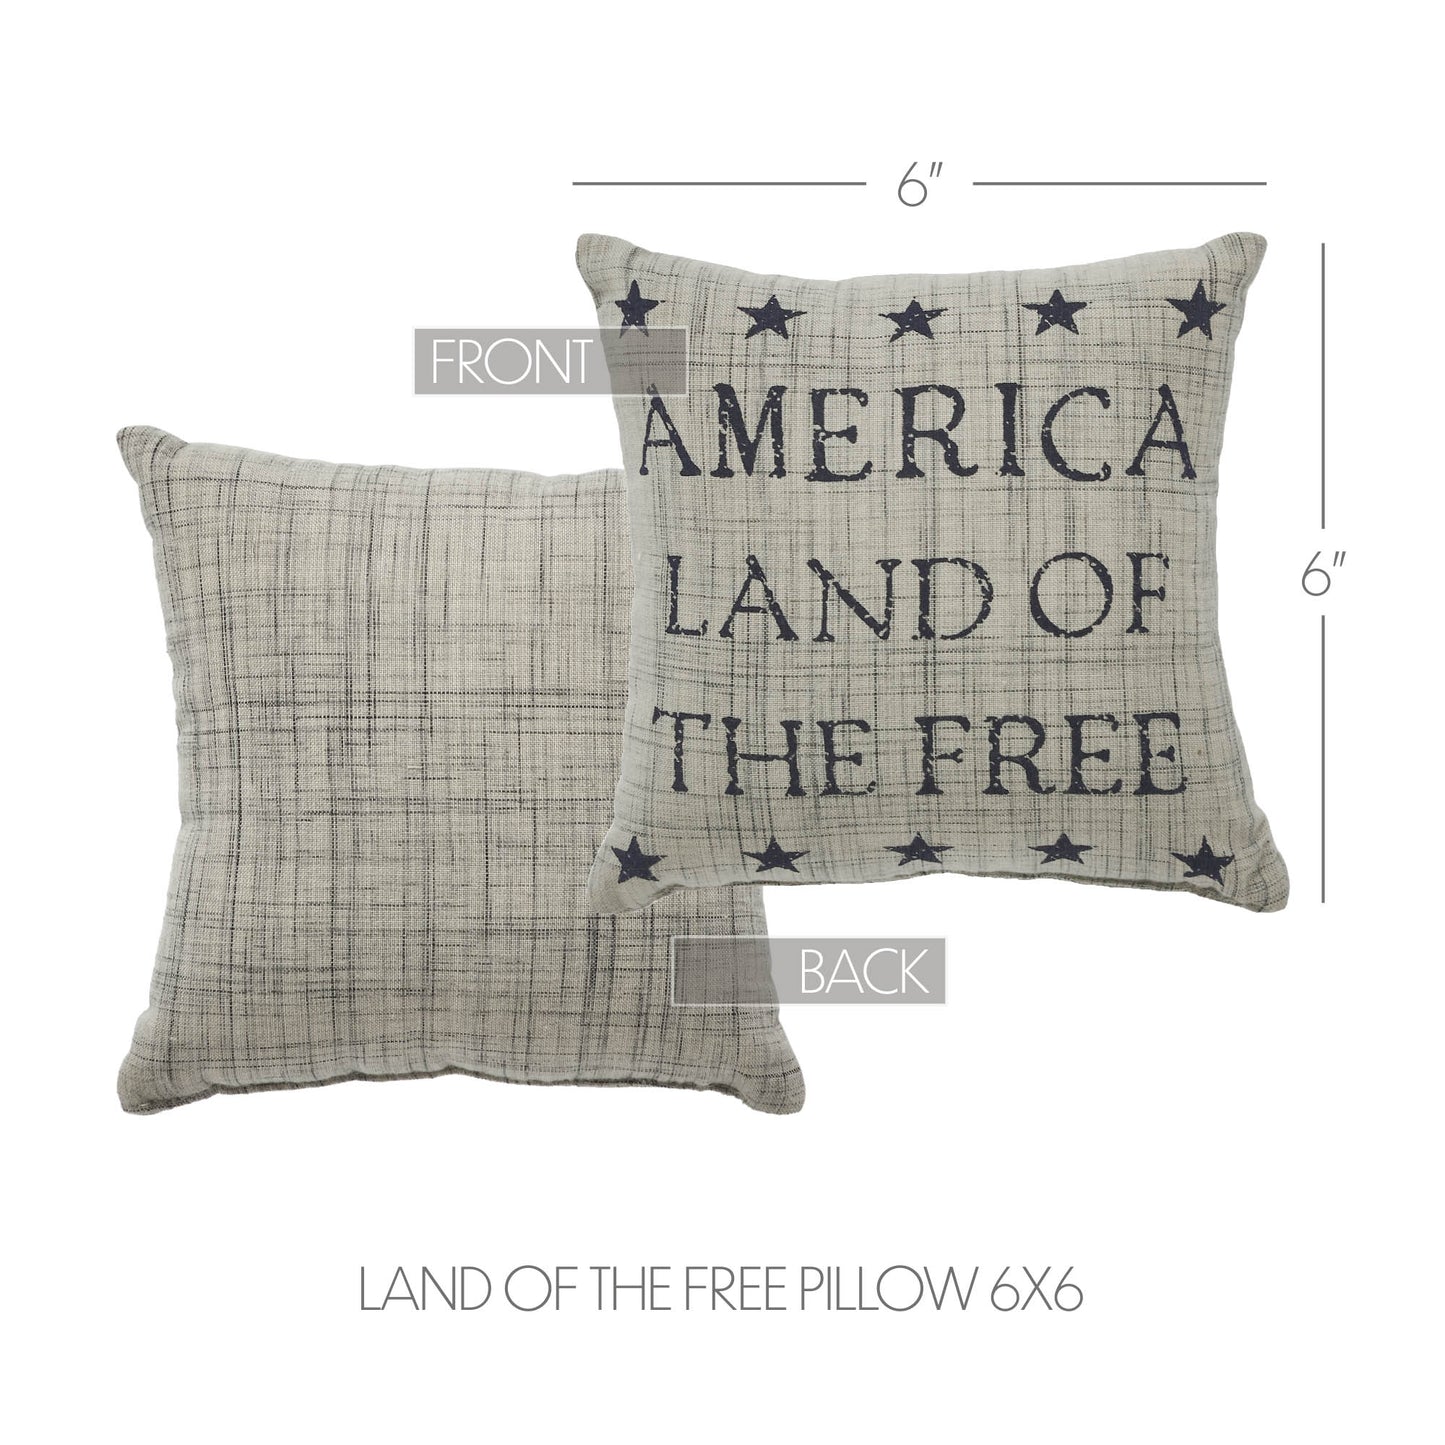 My Country Land of the Free Pillow 6x6 SpadezStore